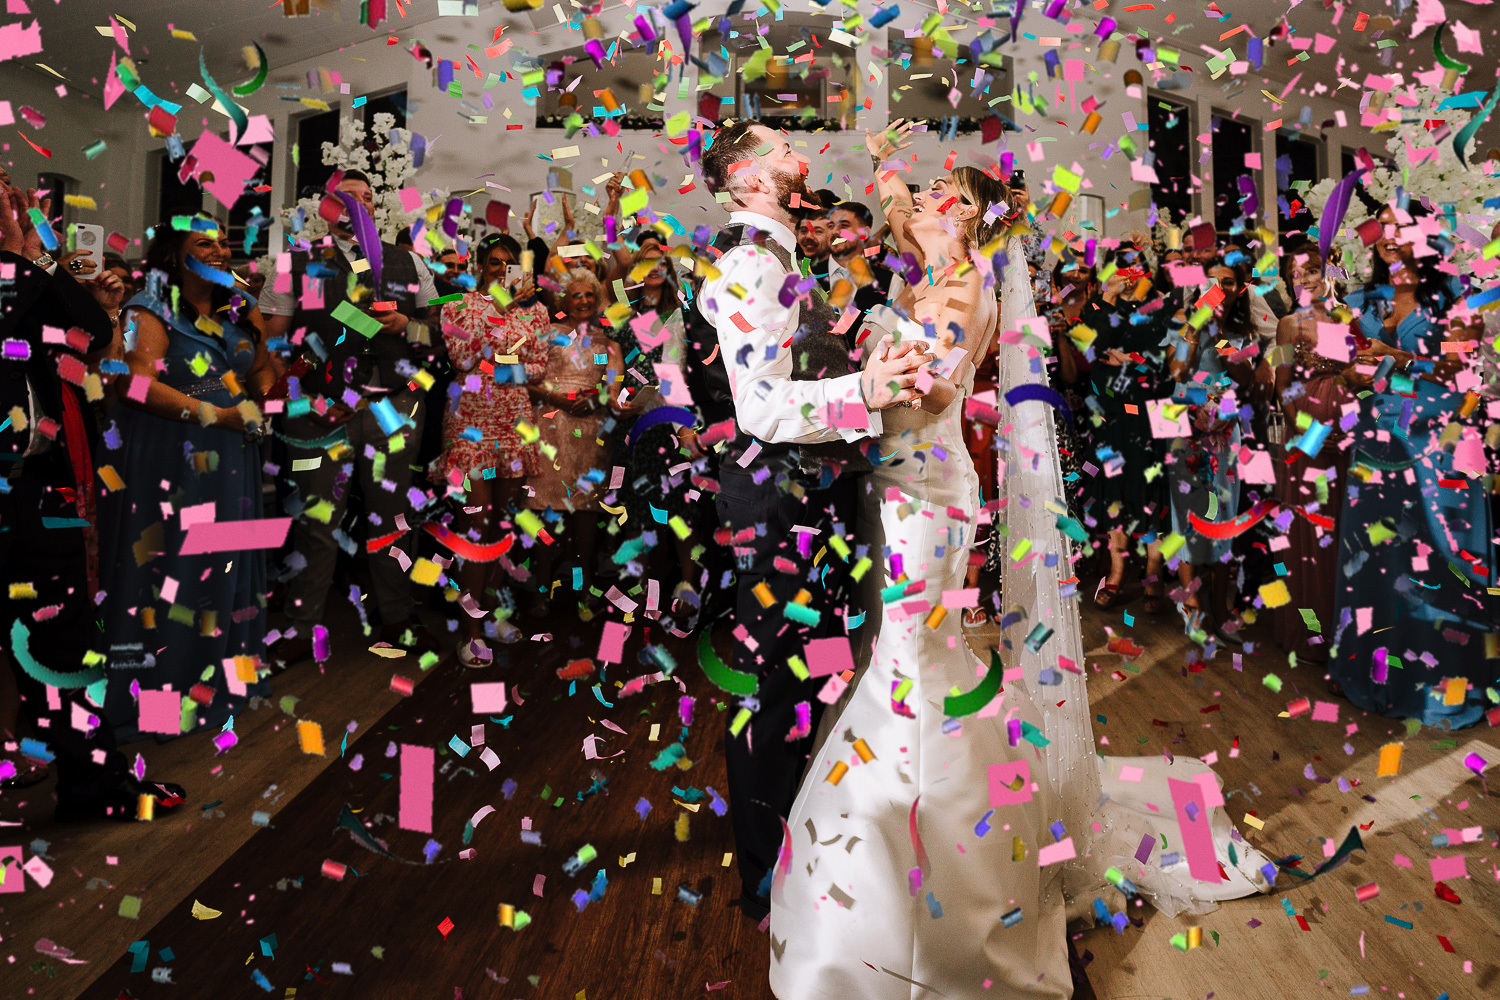 First dance with confetti